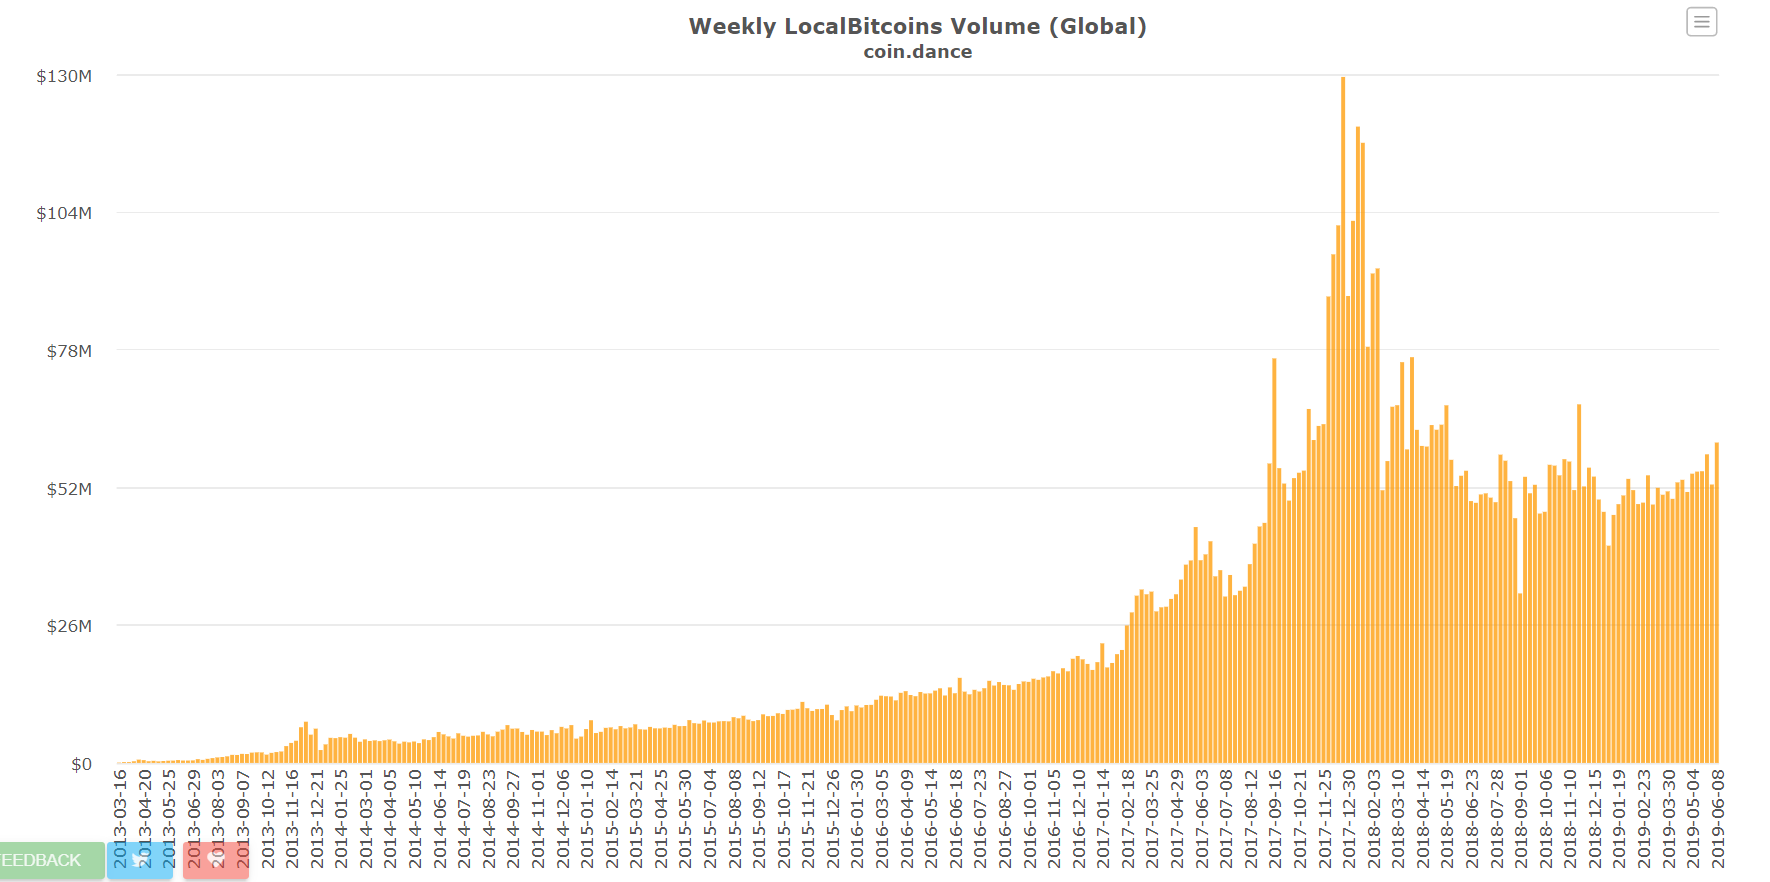 LocalBitcoins’ Daily Trading Volume Continues to Hold ...